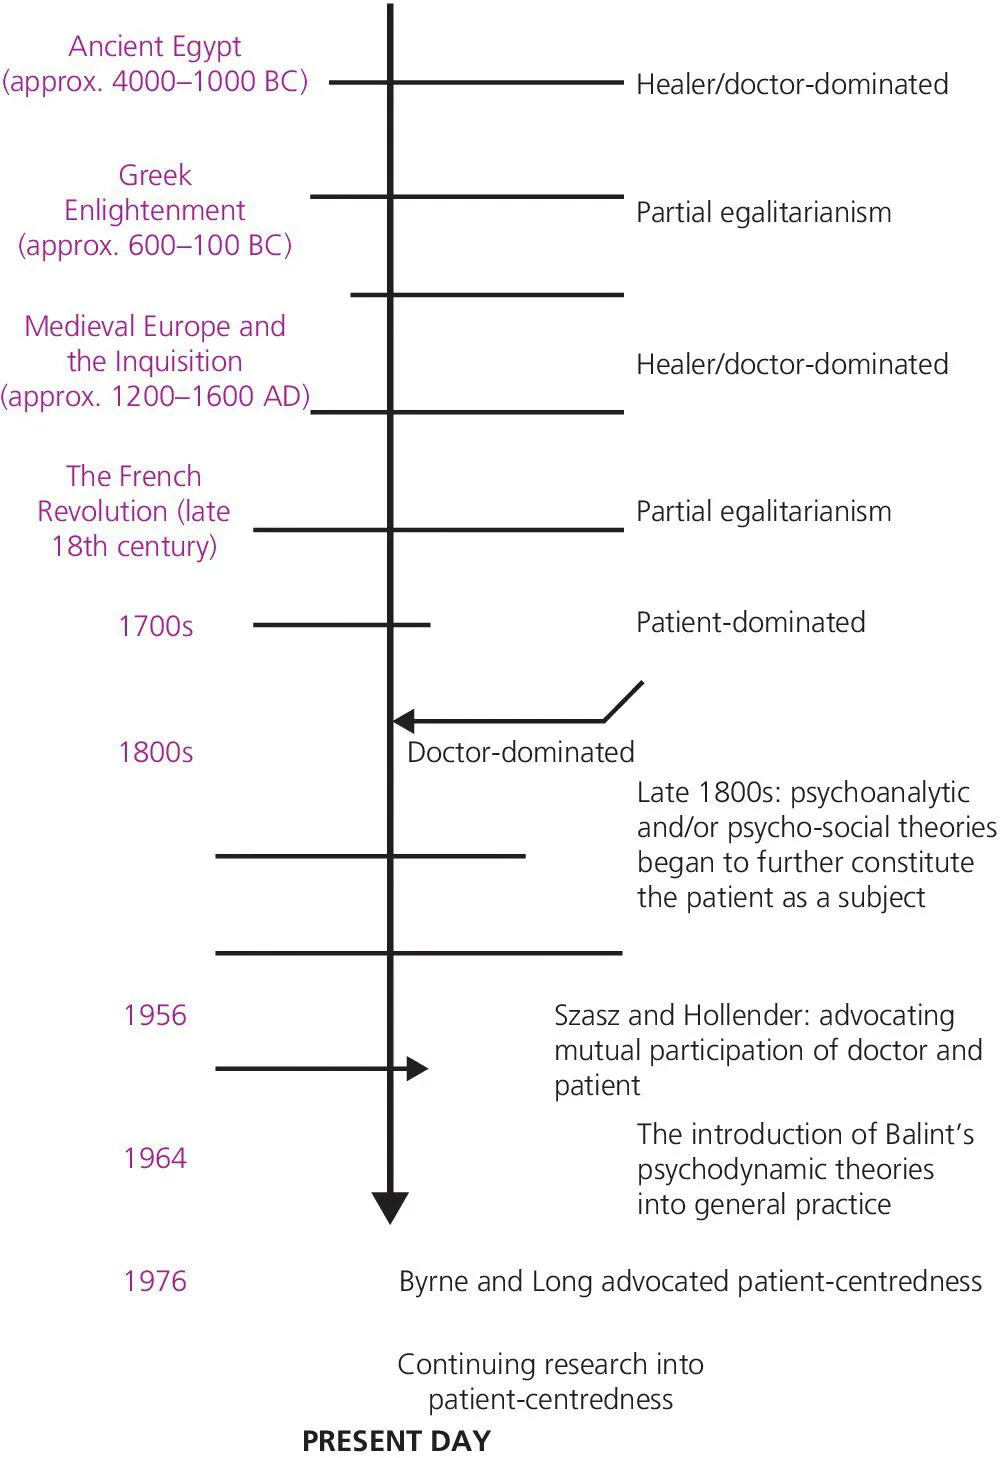 Illustration of evolution of the doctor–patient relationship illustrated by a downward arrow from healer/doctor-dominated in ancient Egypt to continuing research into patient-centredness in present day.